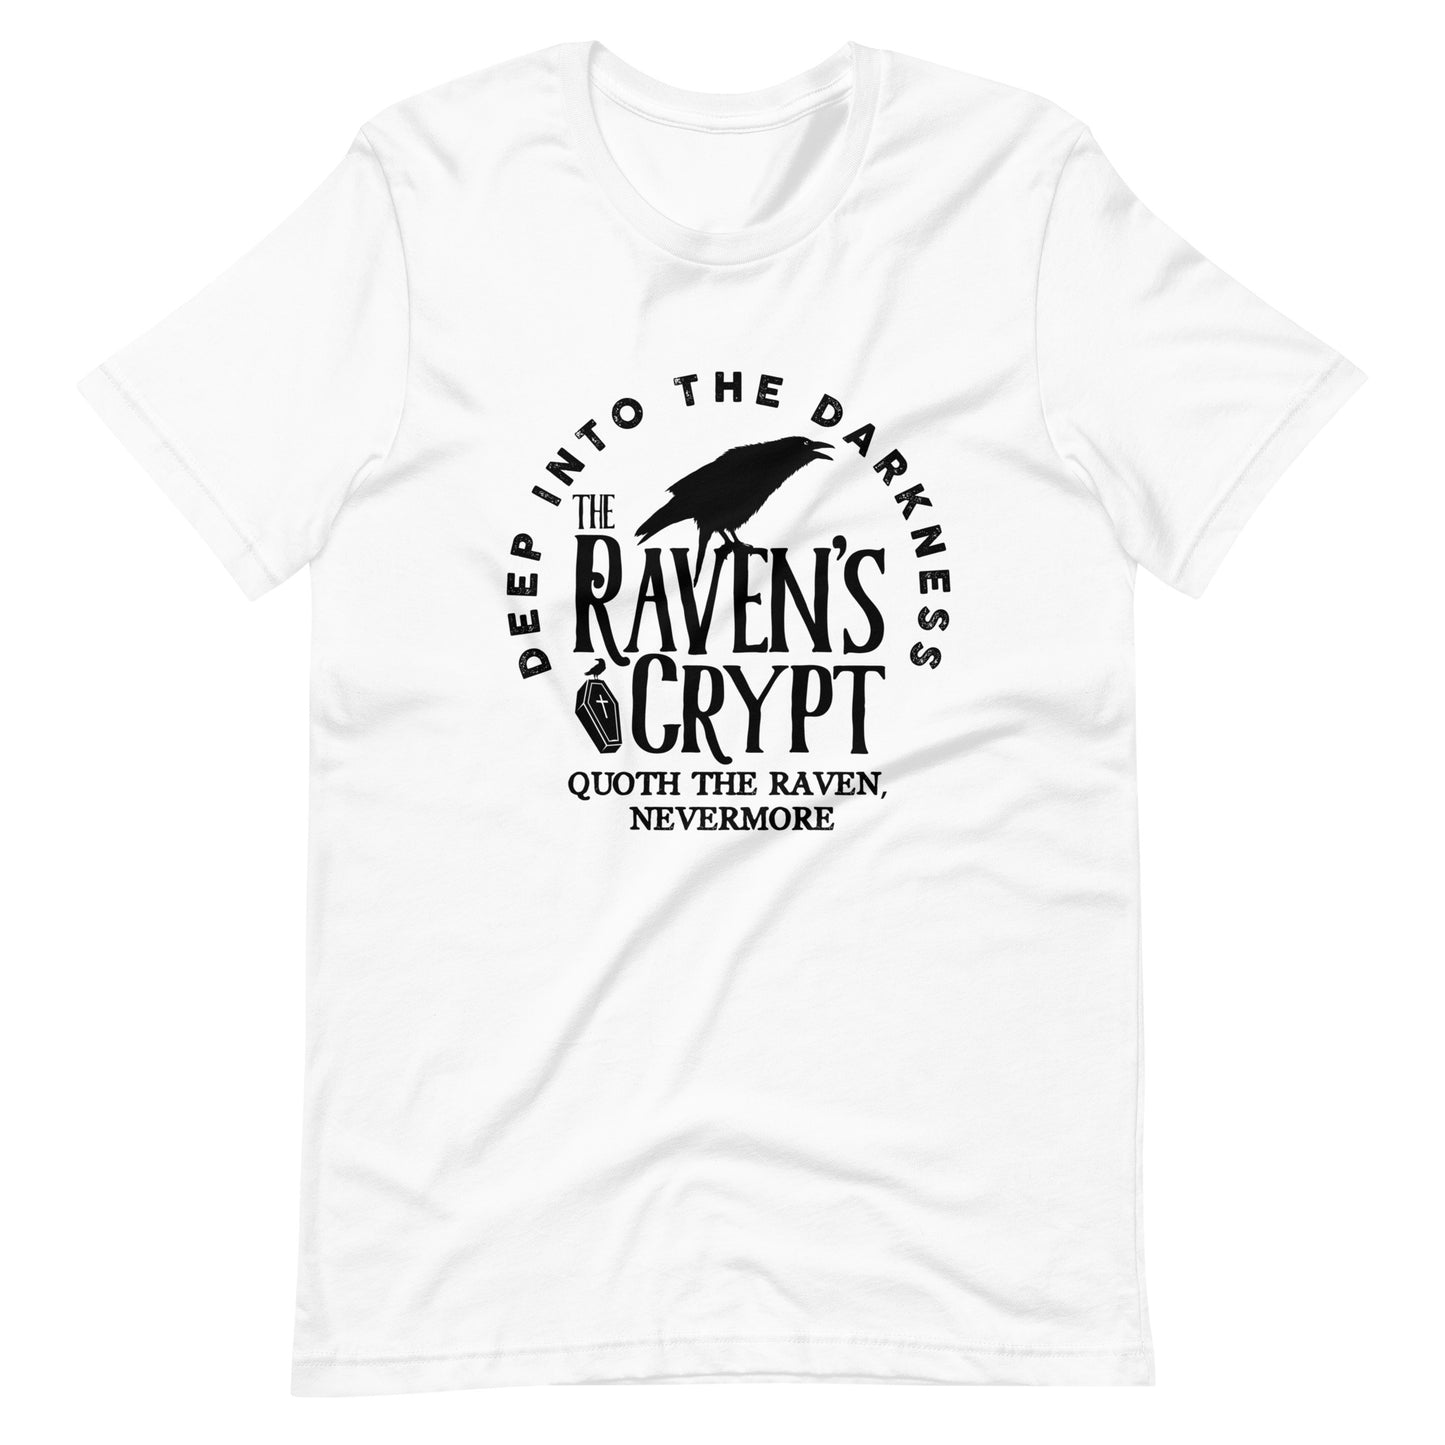 Deep Into the Darkness The Raven's Crypt - Men's t-shirt - White Front